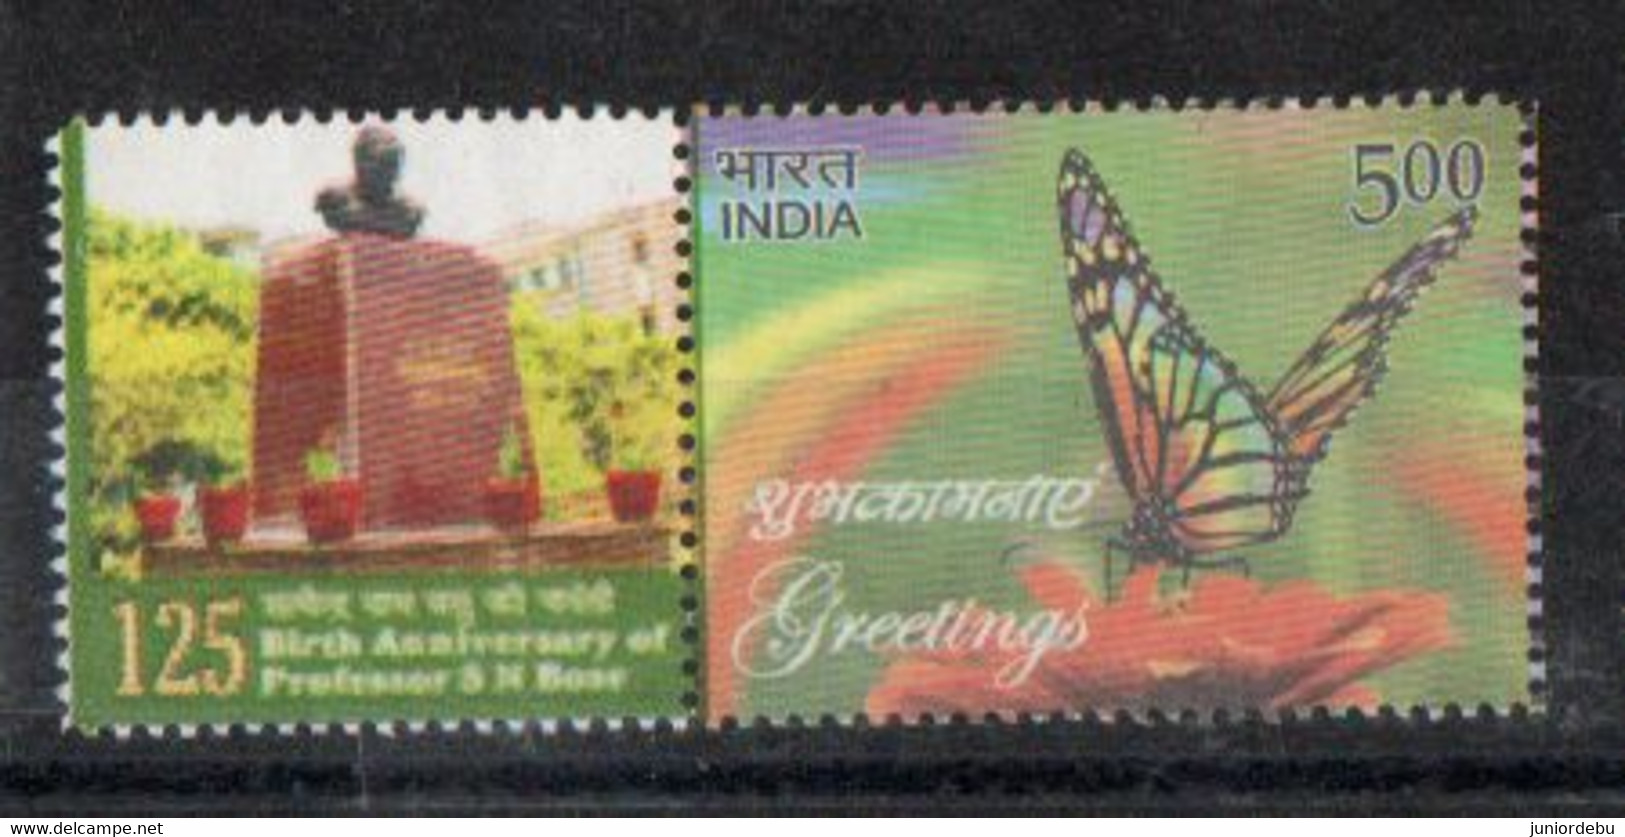 India - 2018 - My Stamp -  Prof  Satyendra Nath Bose Science Centre - Used - Used Stamps